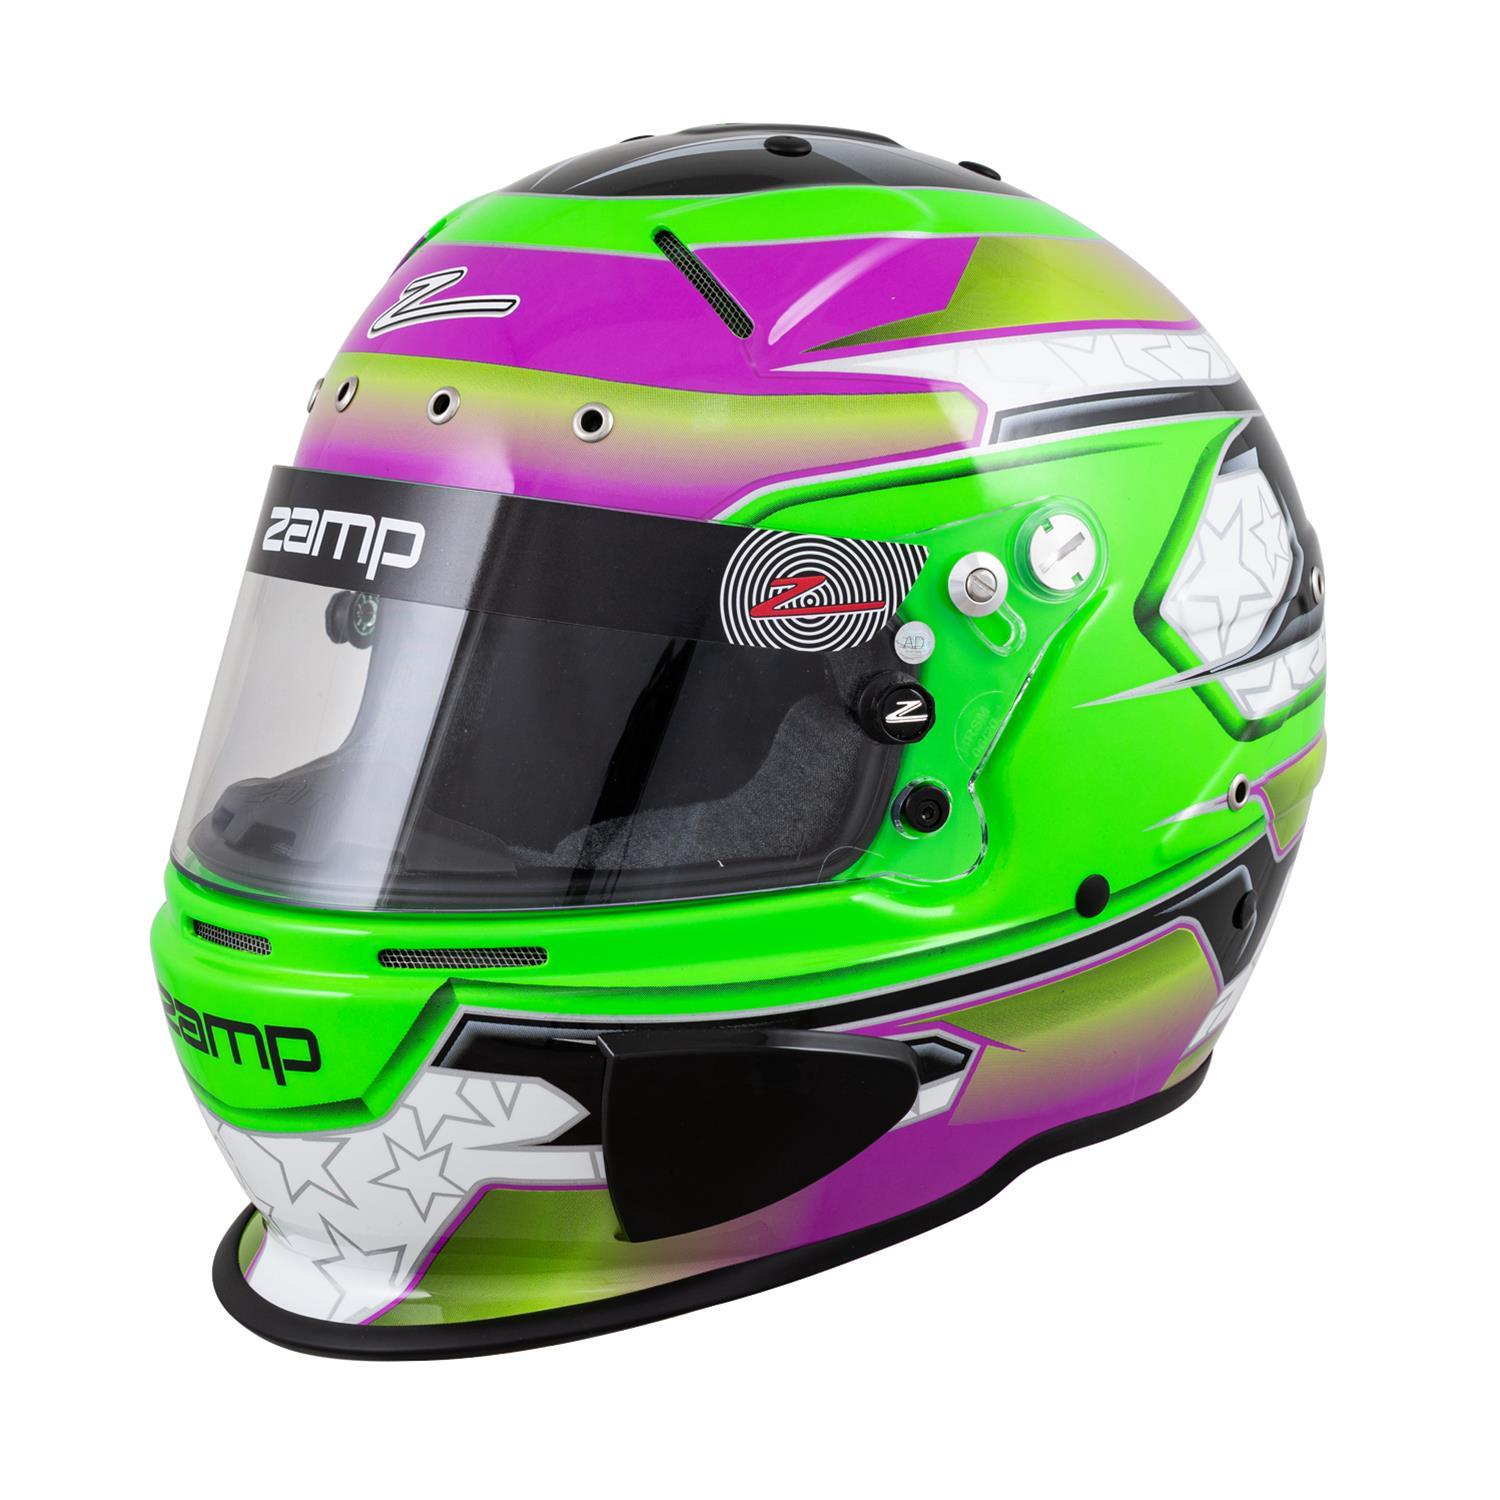 Zamp Racing H760C39L Helmet, RZ-70E Switch, Snell SA2020, FIA Approved, Head and Neck Support Ready, Gloss Green / Purple, Large, Each